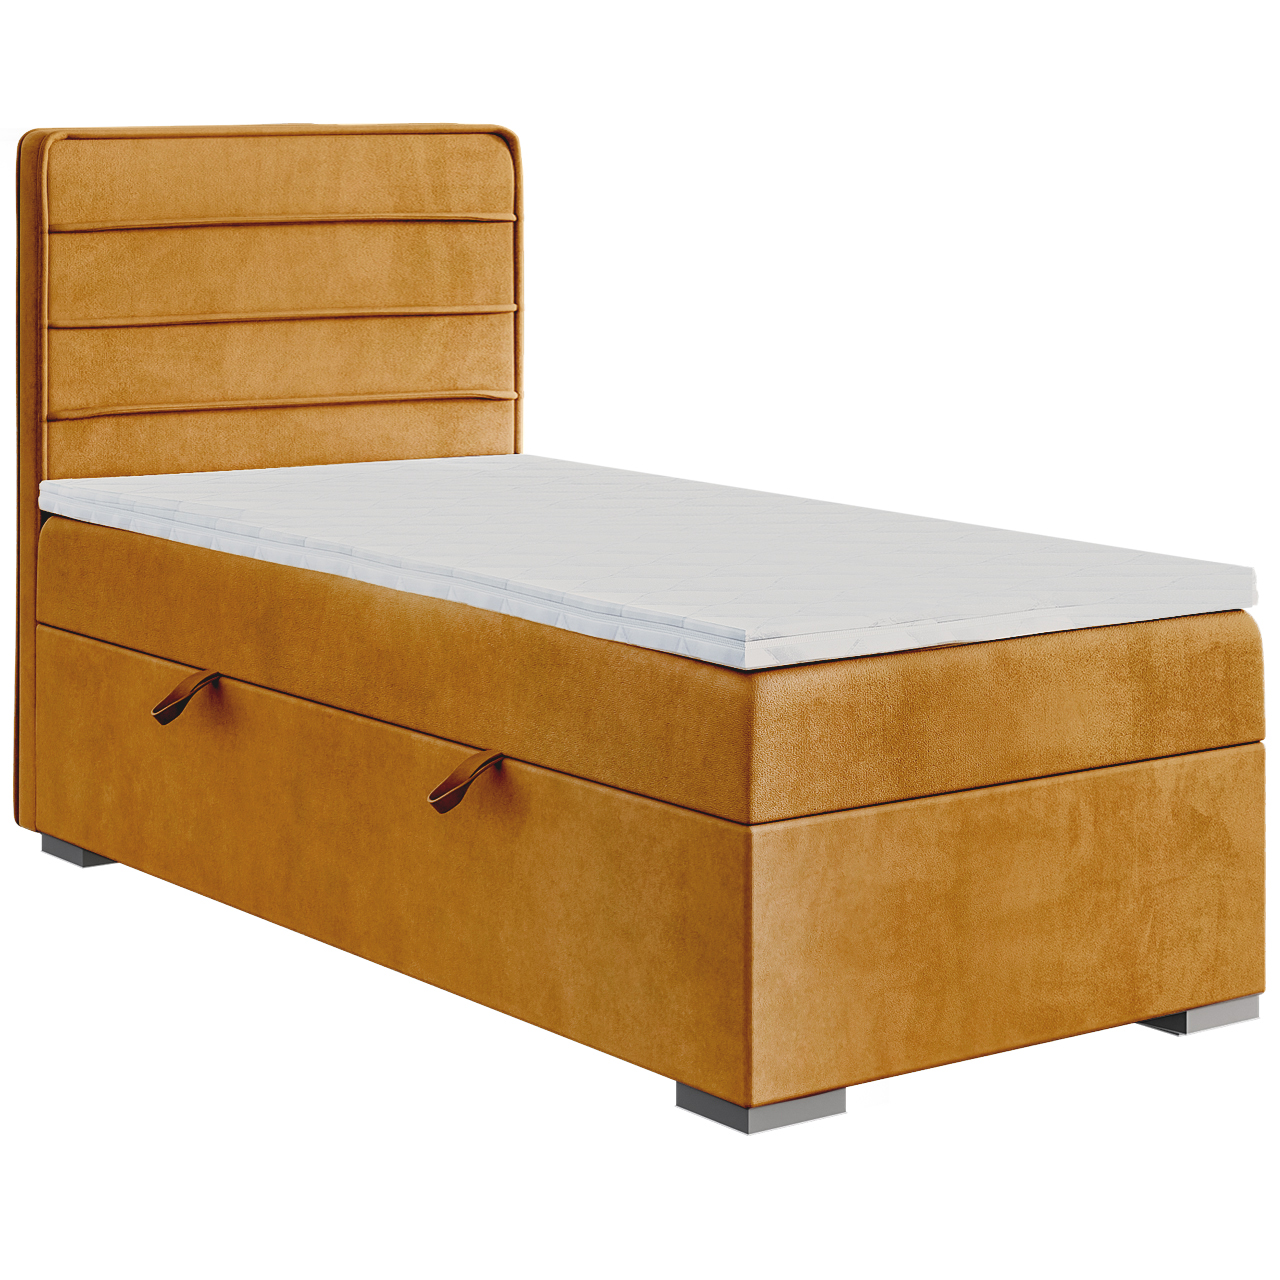 Upholstered bed BEROTTI 80x200 right riviera 41